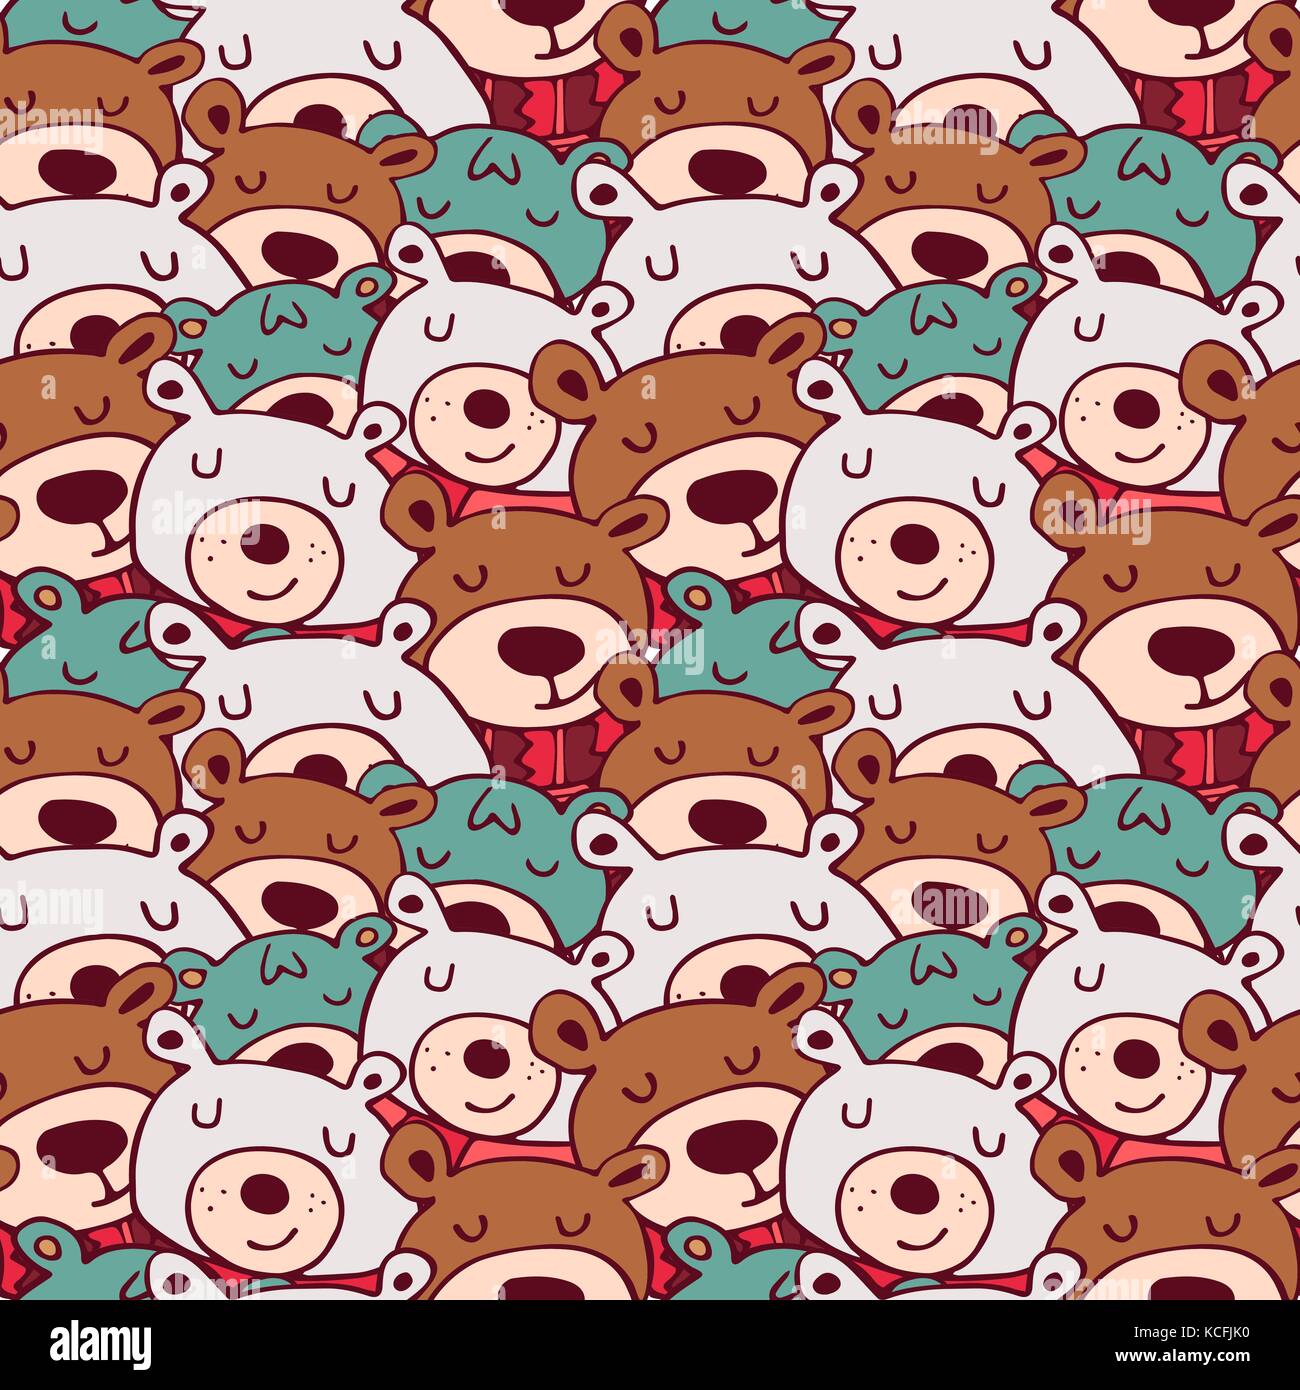 Cute christmas hand drawn animal seamless pattern, funny winter bears with scarf. EPS10 vector. Stock Vector